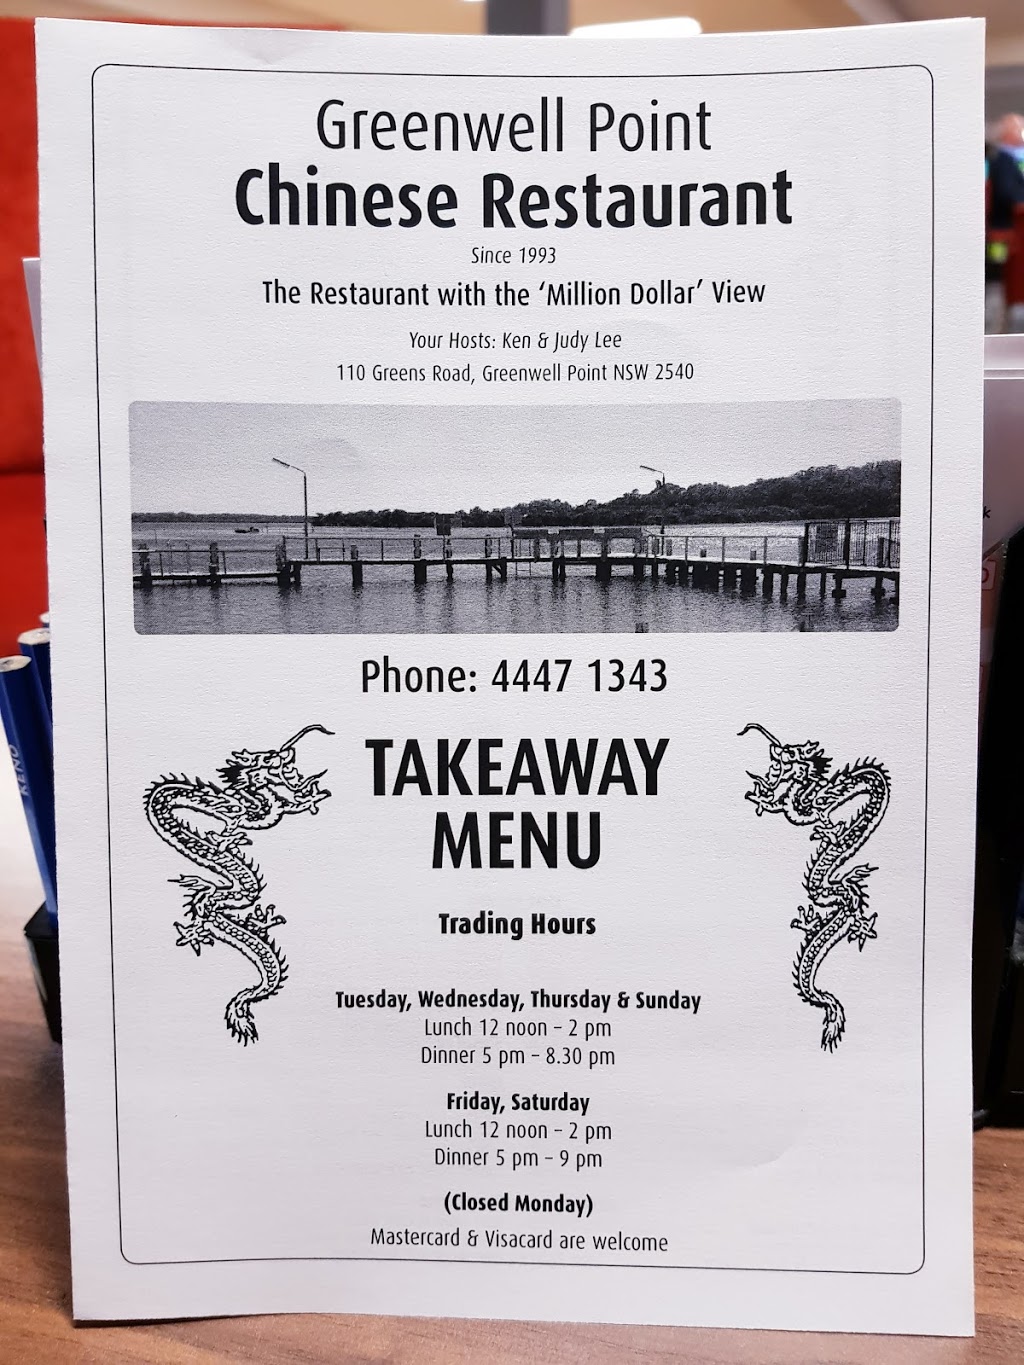 Greenwell Point Chinese Restaurant | restaurant | LOT 3 Greens Rd, Greenwell Point NSW 2540, Australia | 0244471343 OR +61 2 4447 1343